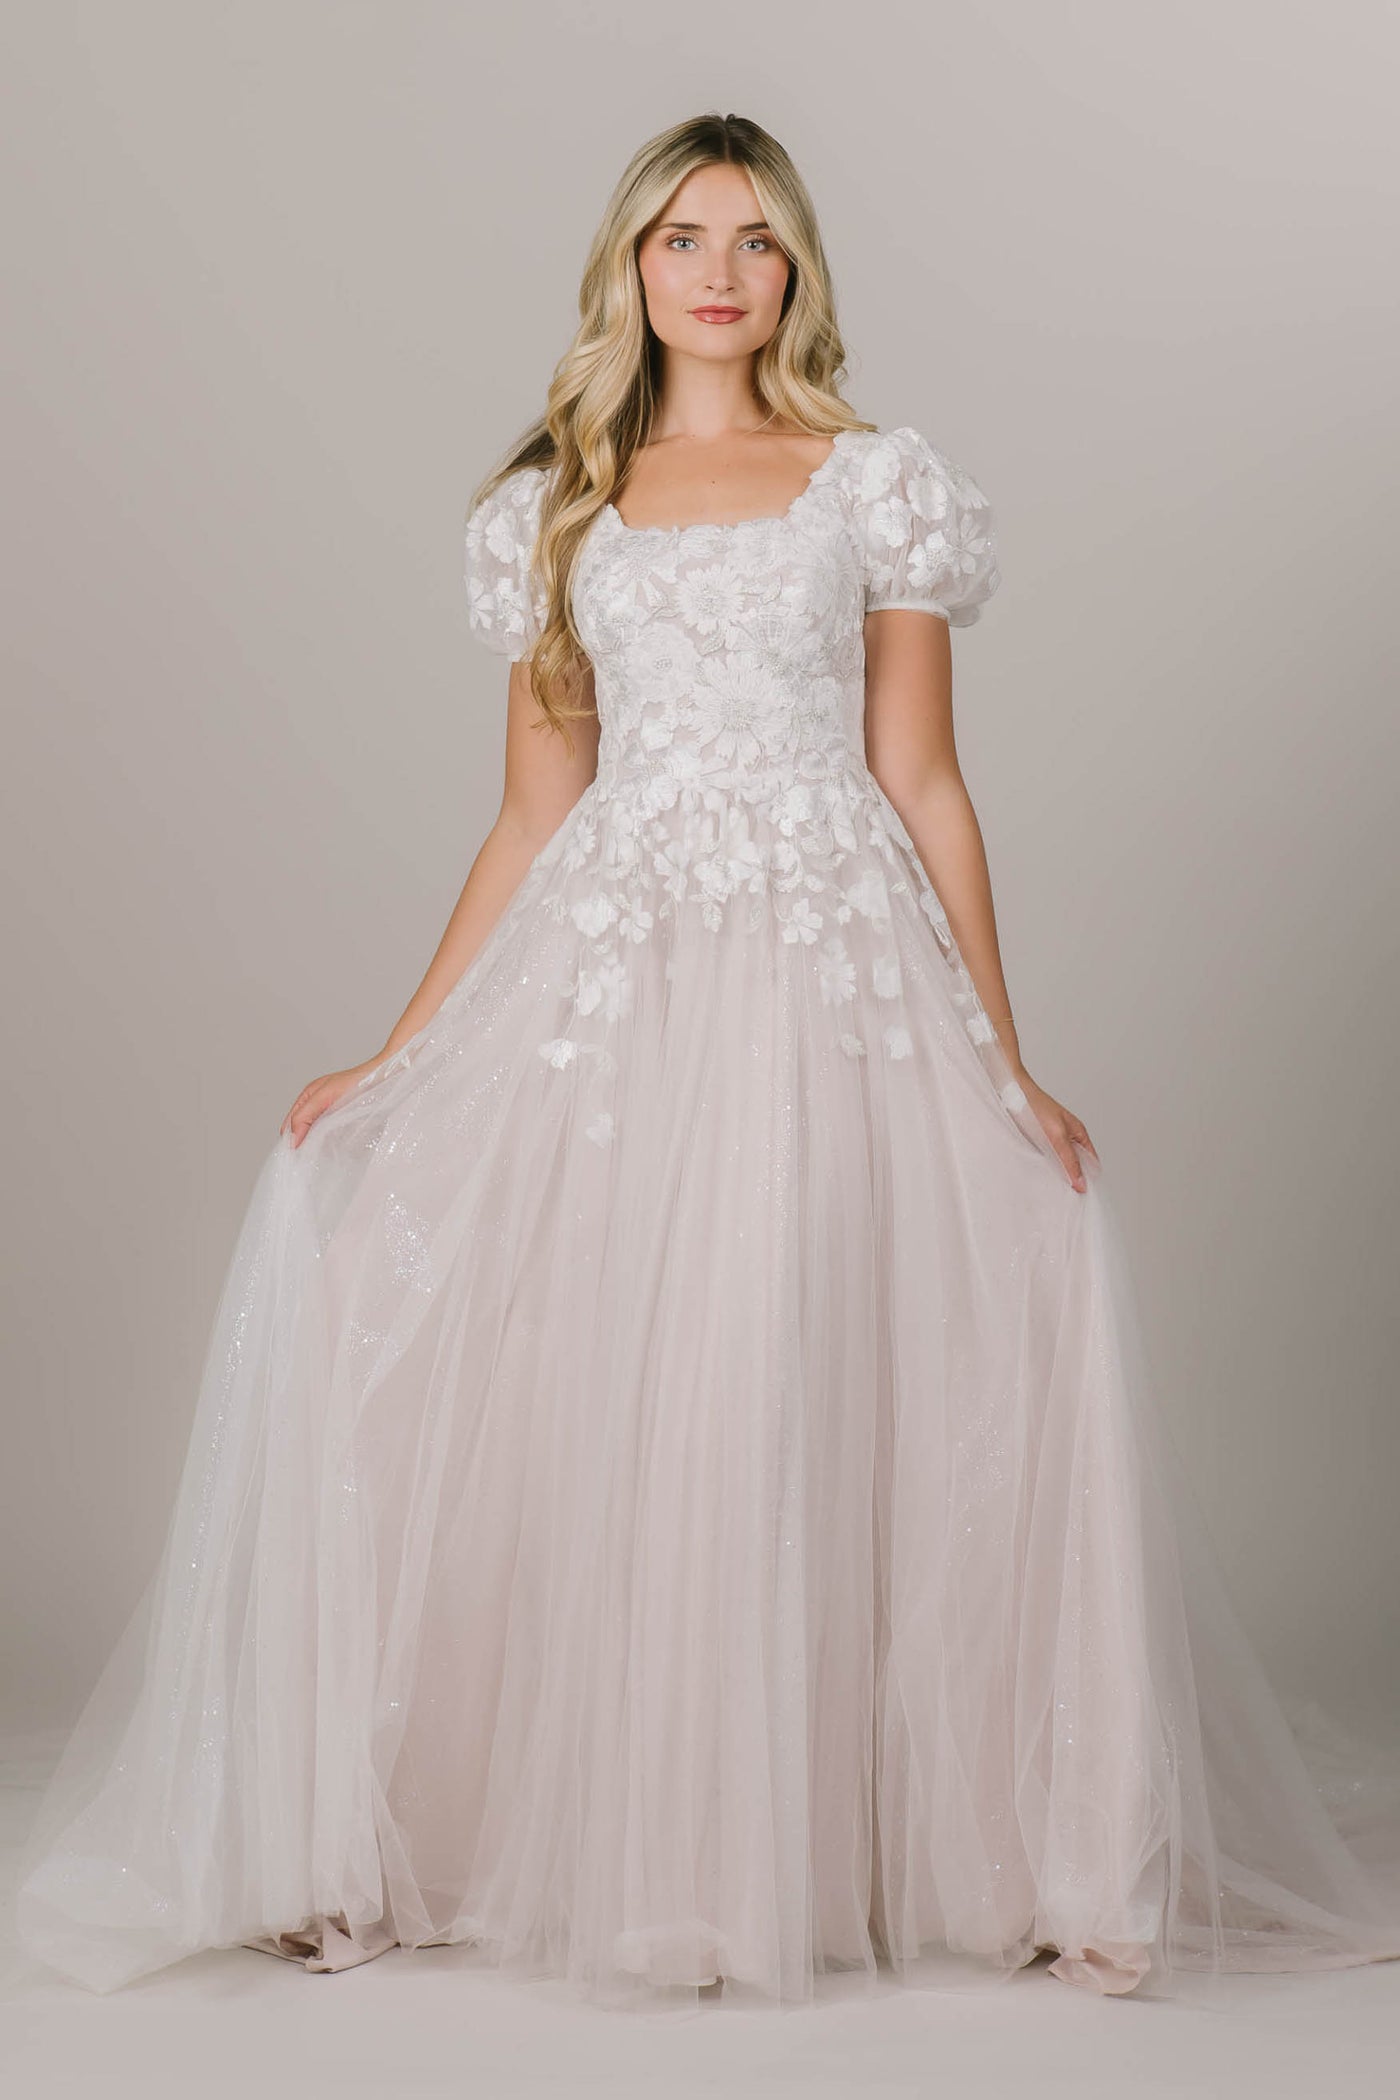 This is a modest wedding dress with puff sleeves and a a laced bodice.